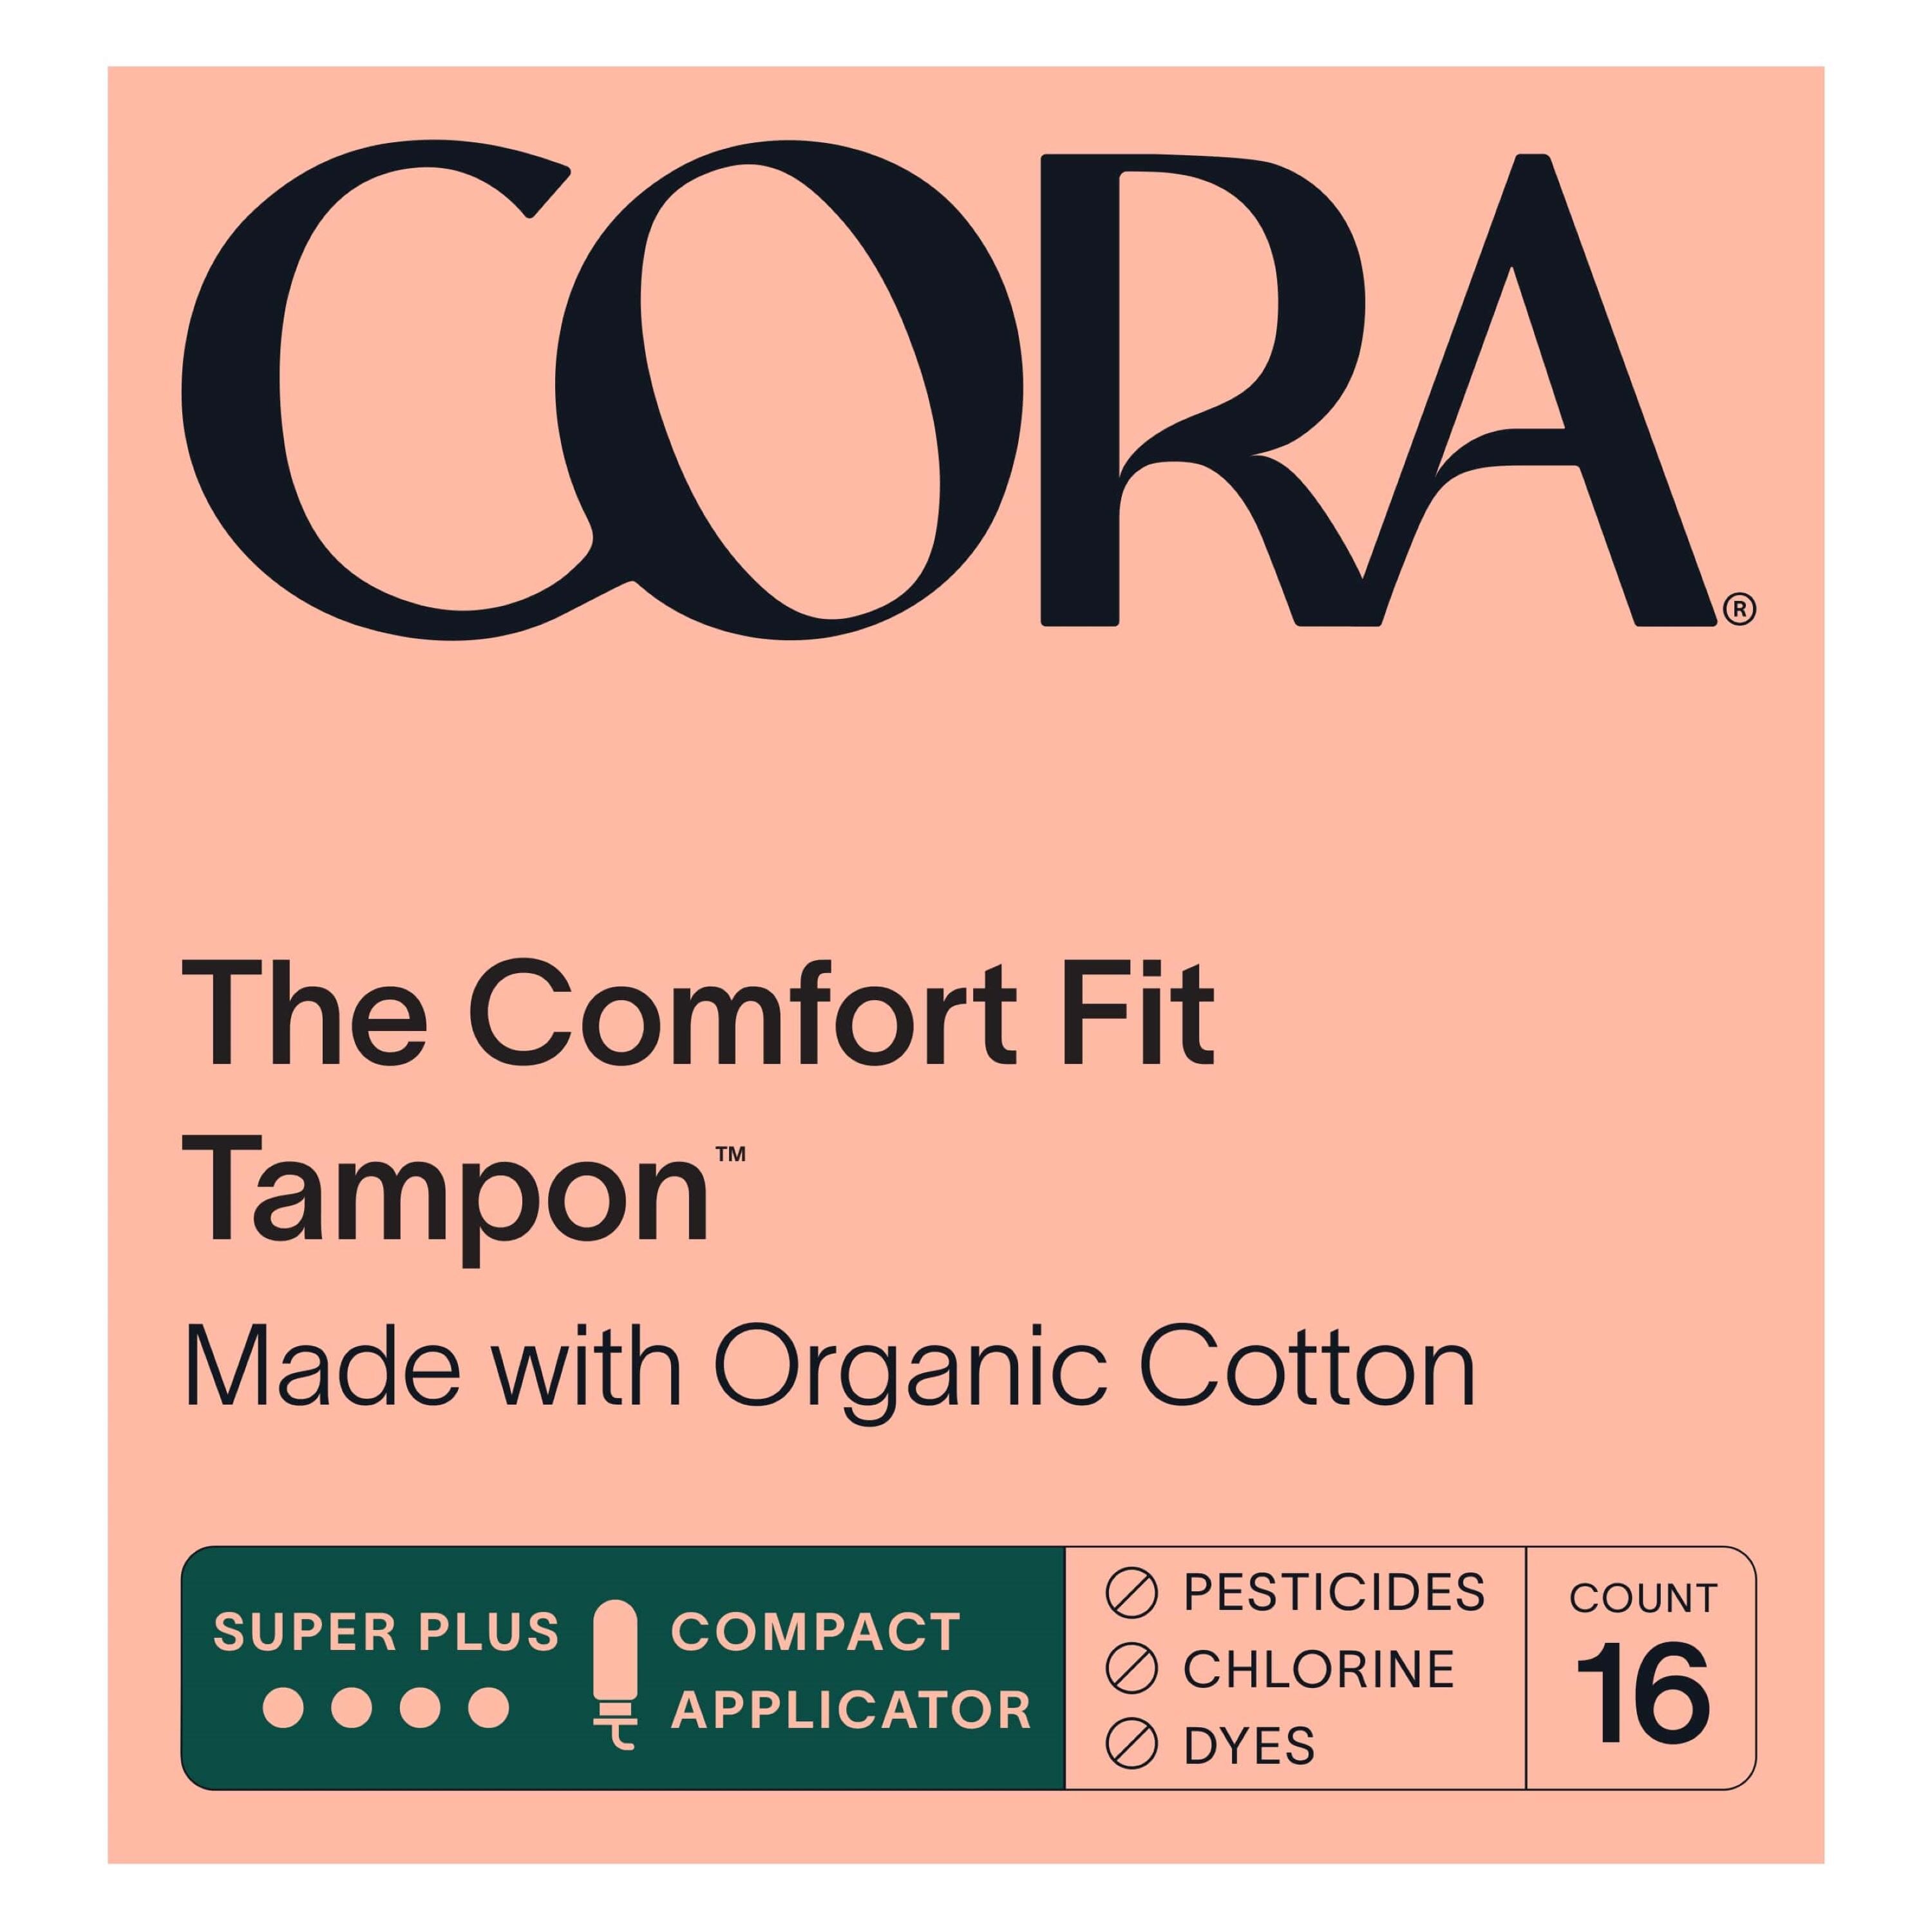 CORA The Comfort Fit Tampon, Organic Cotton, Super Plus Absorbency, 16 CT